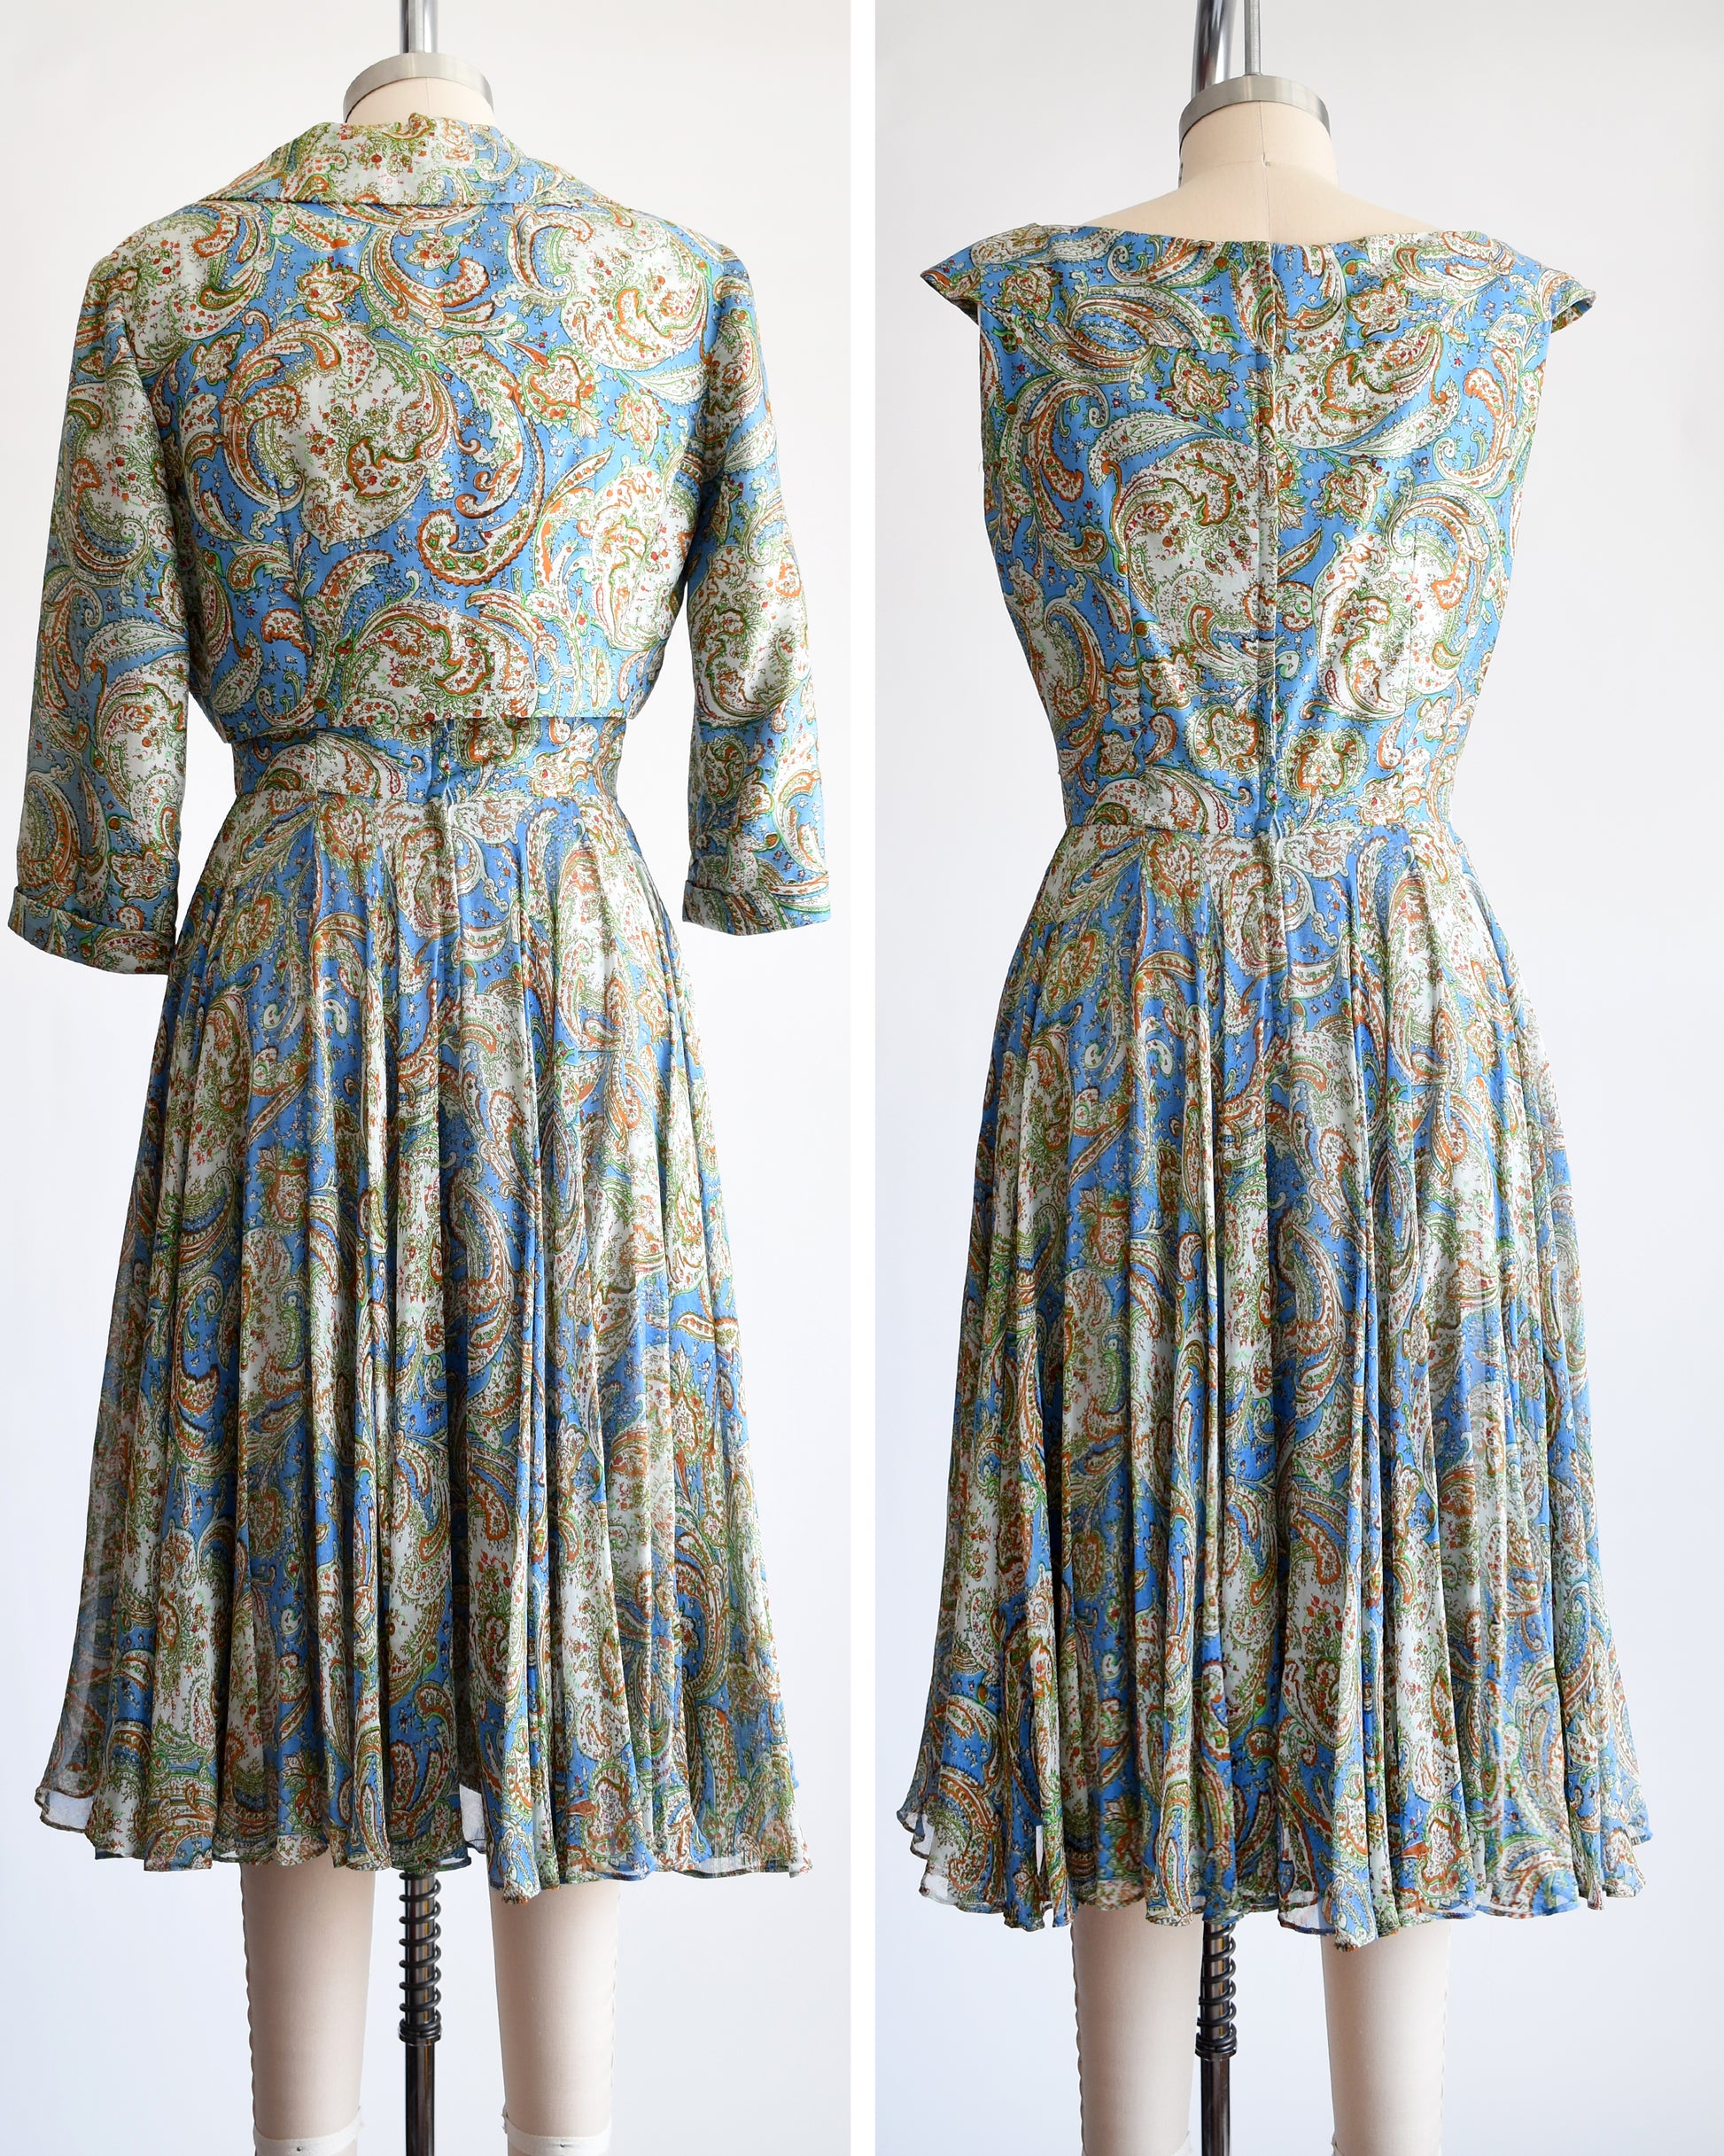 side by side back views of a vintage 1950s silk paisley dress set by Saks Fifth Avenue. the jacket is off in the left photo